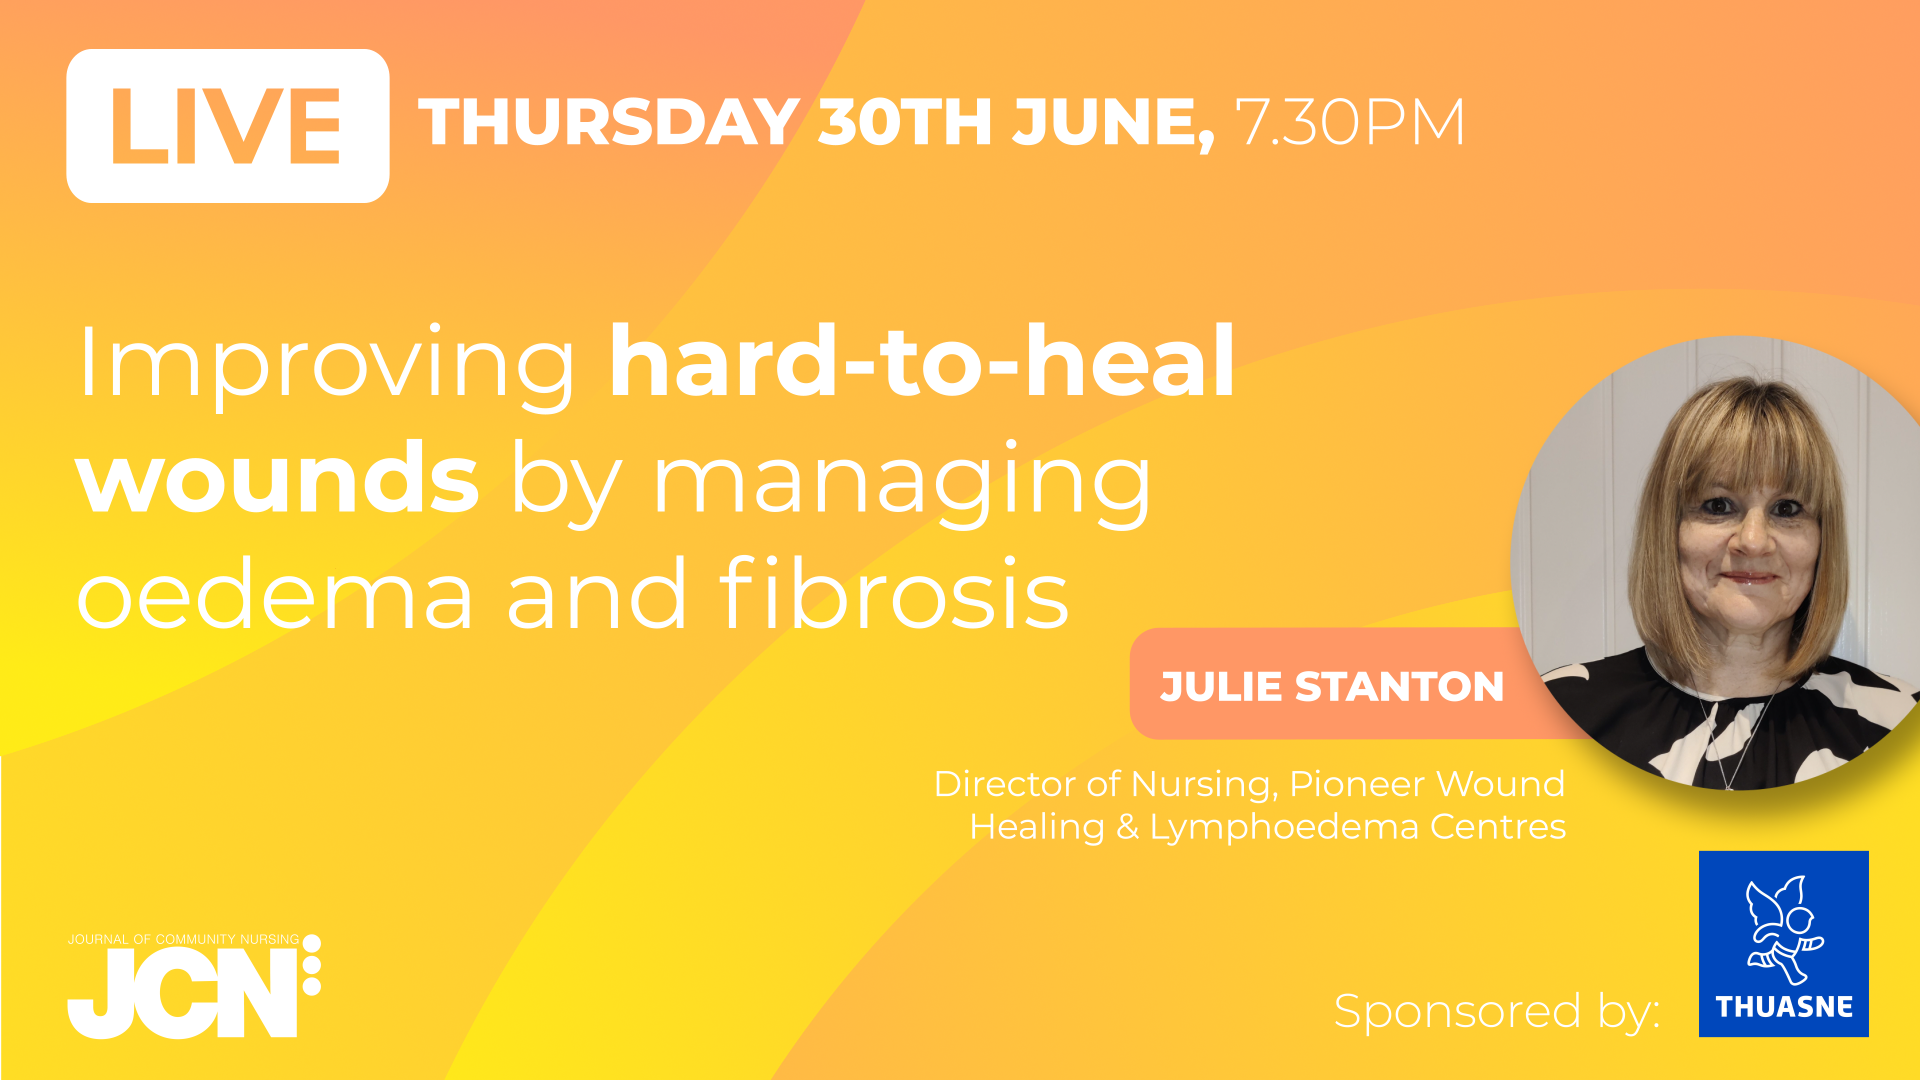 Facebook Live: Improving hard-to-heal wounds by managing oedema and fibrosis